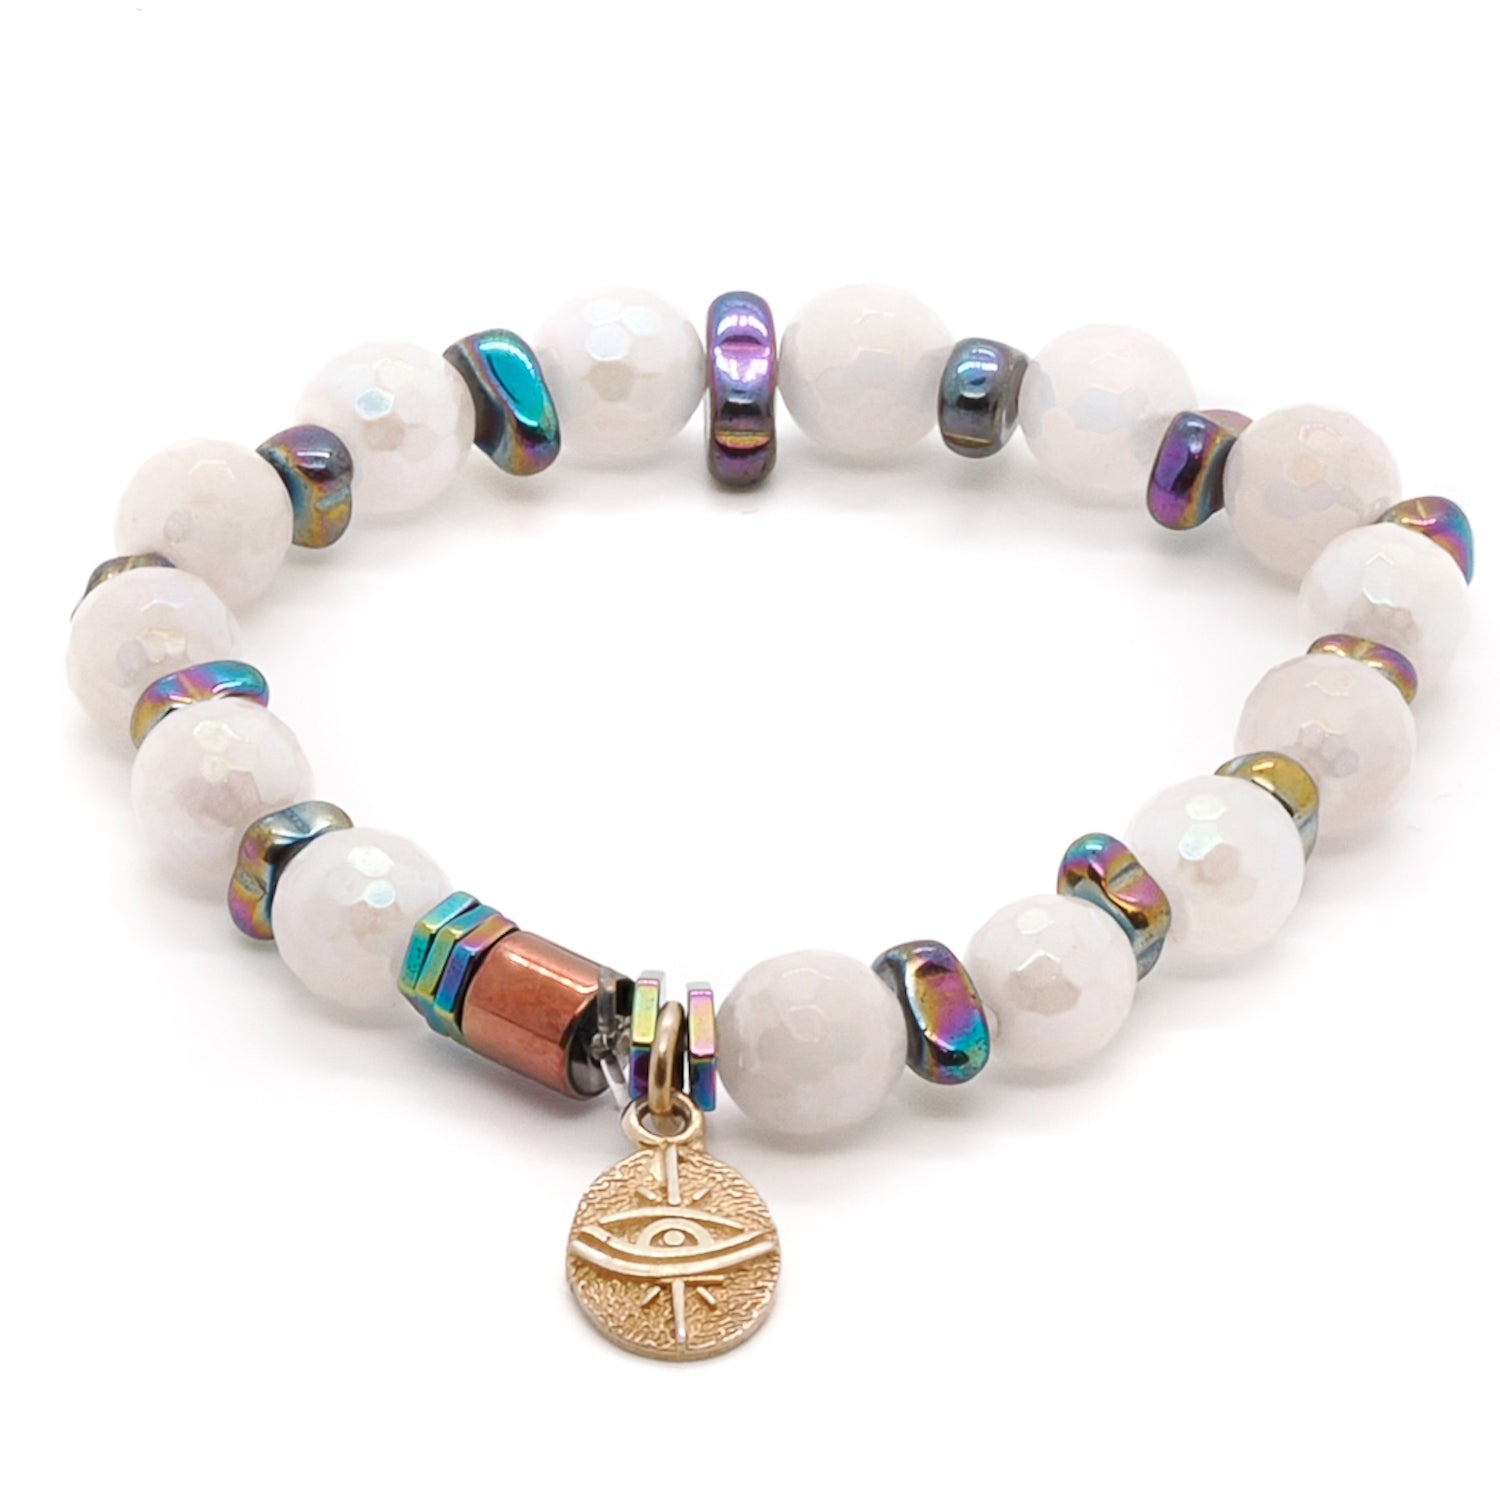 Discover the beauty and meaning of the Quartz Protection Bracelet, adorned with multicolor nugget hematite stone beads and a stunning Rose Quartz accent.